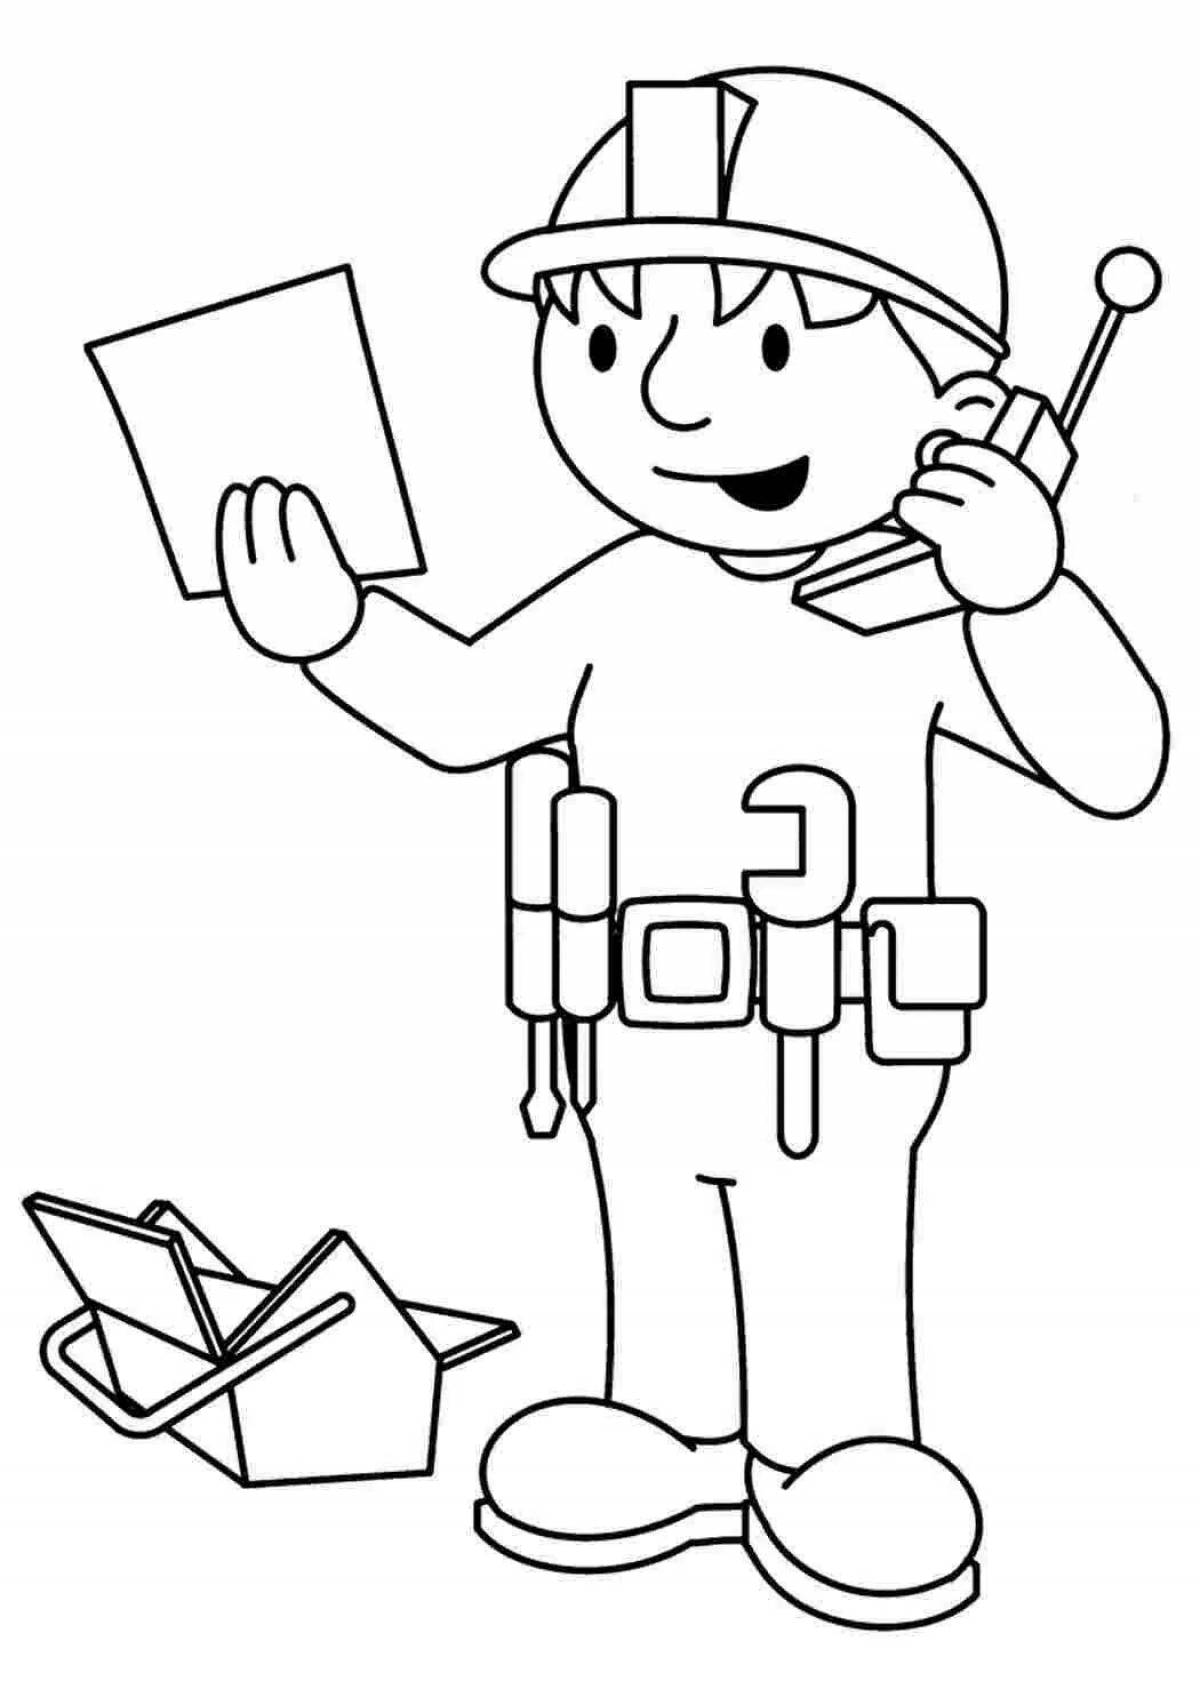 Colorful builder coloring for kids